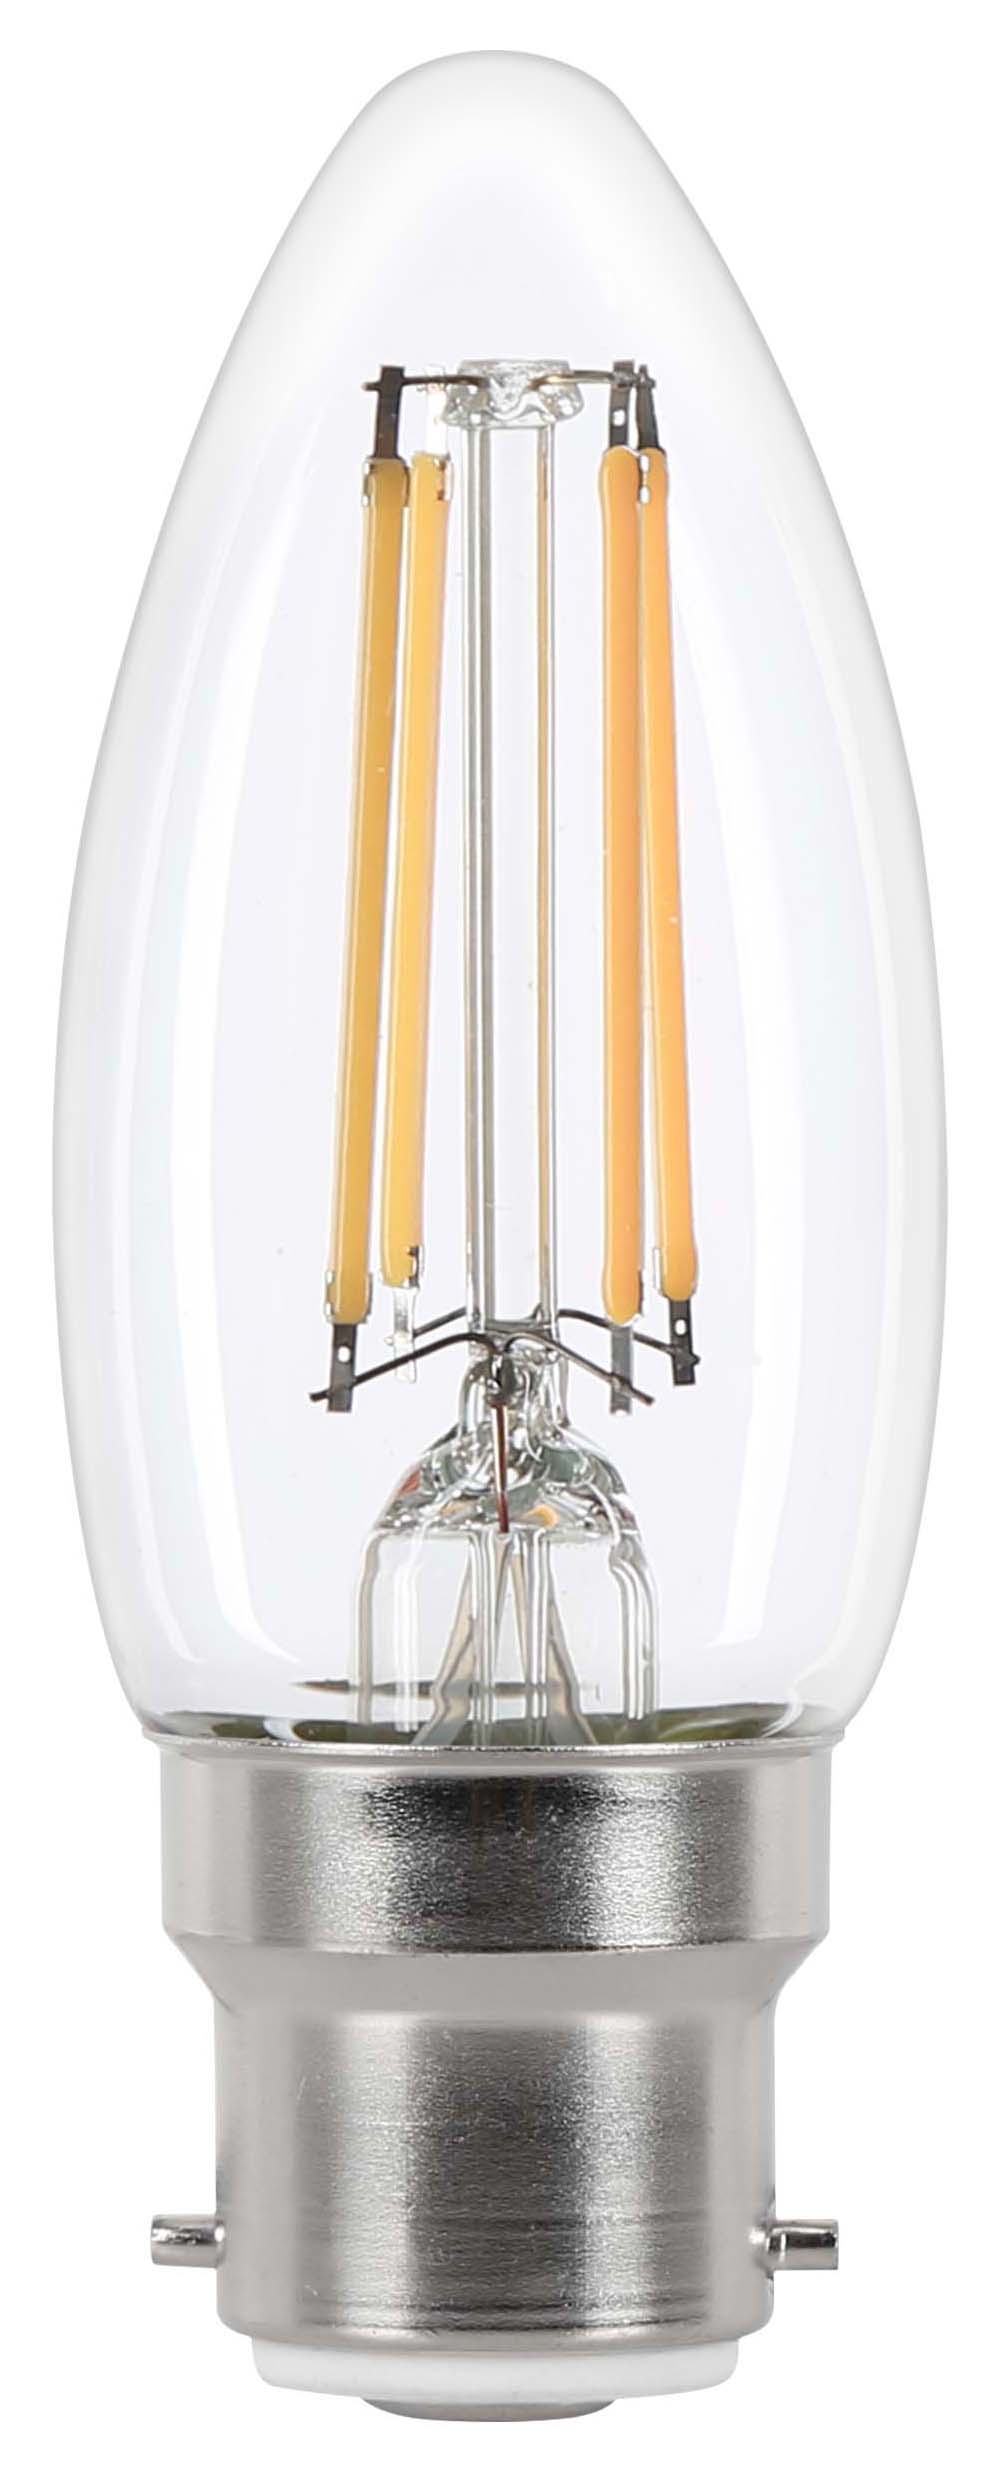 Wickes Non-Dimmable Filament B22 Candle 3.4W Warm White Light Bulb - Pack of 4